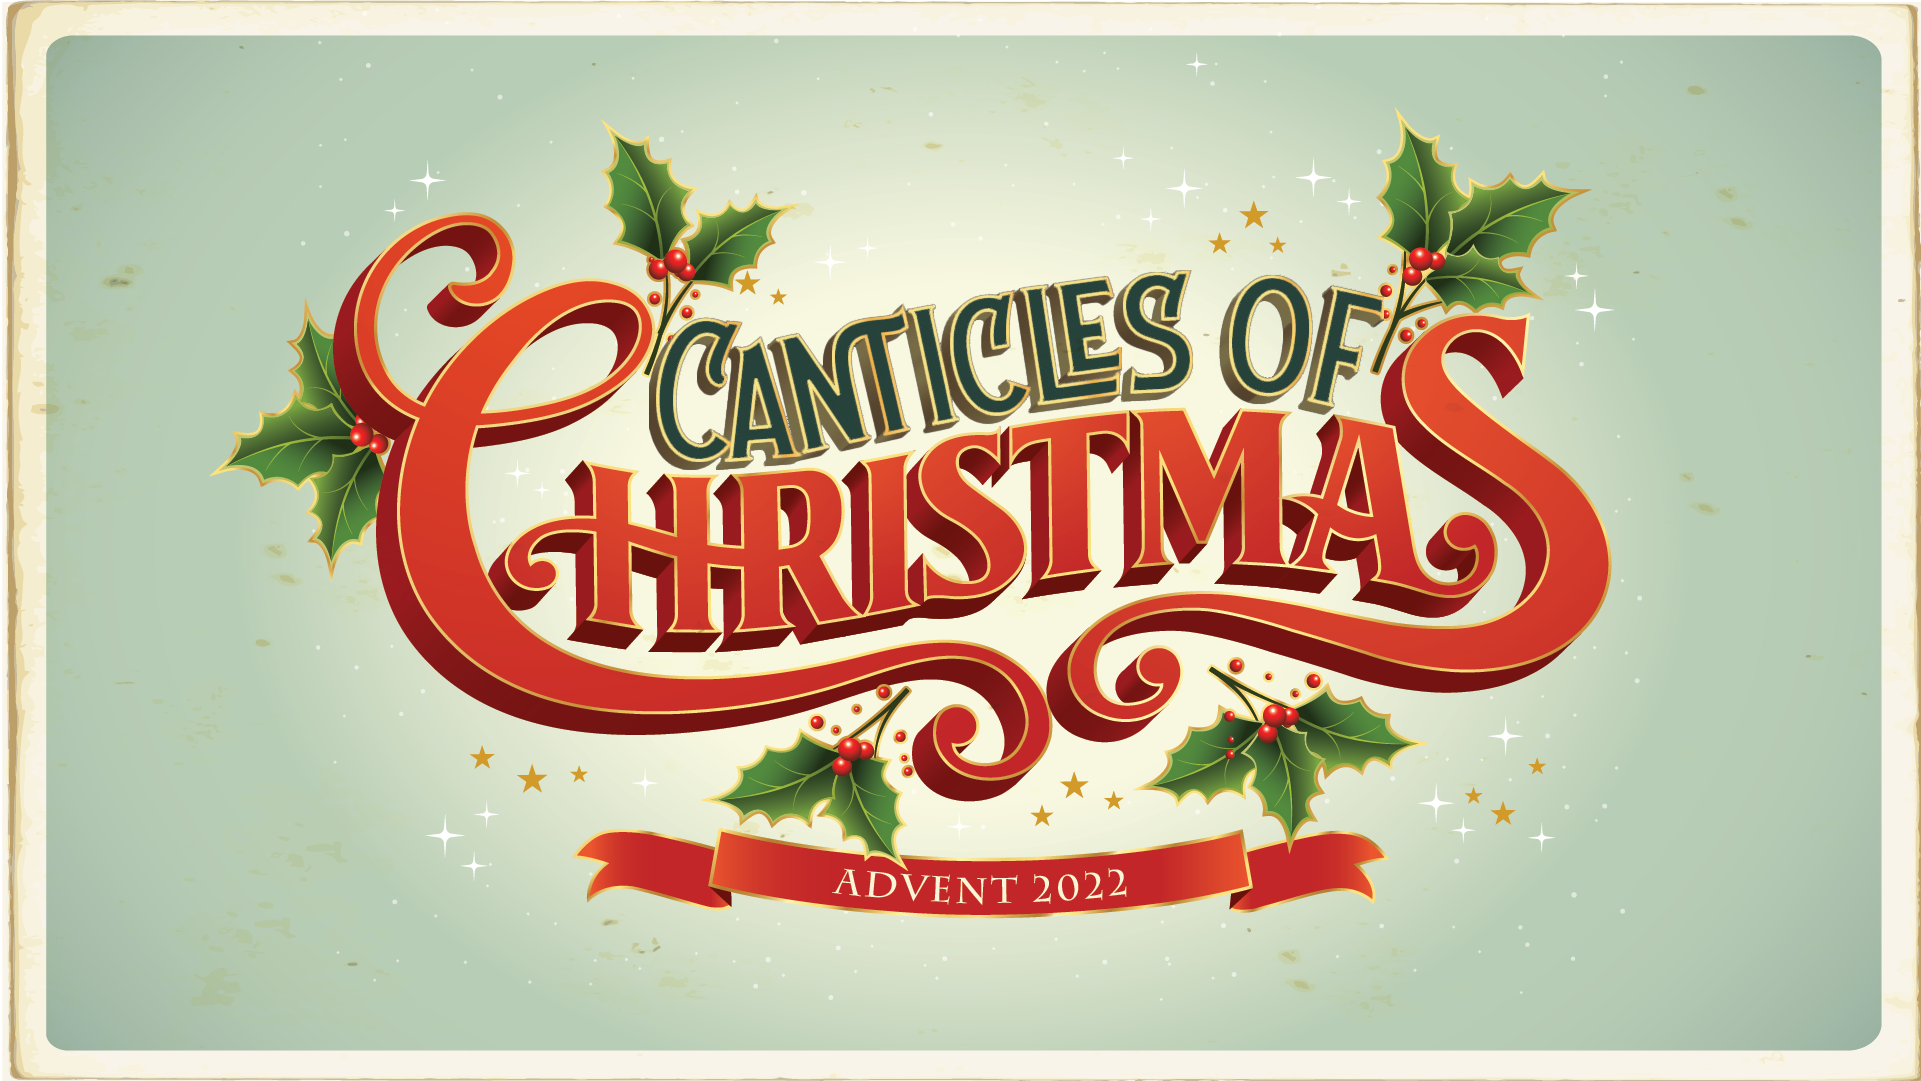 Introduction to Canticles of Christmas Devotional